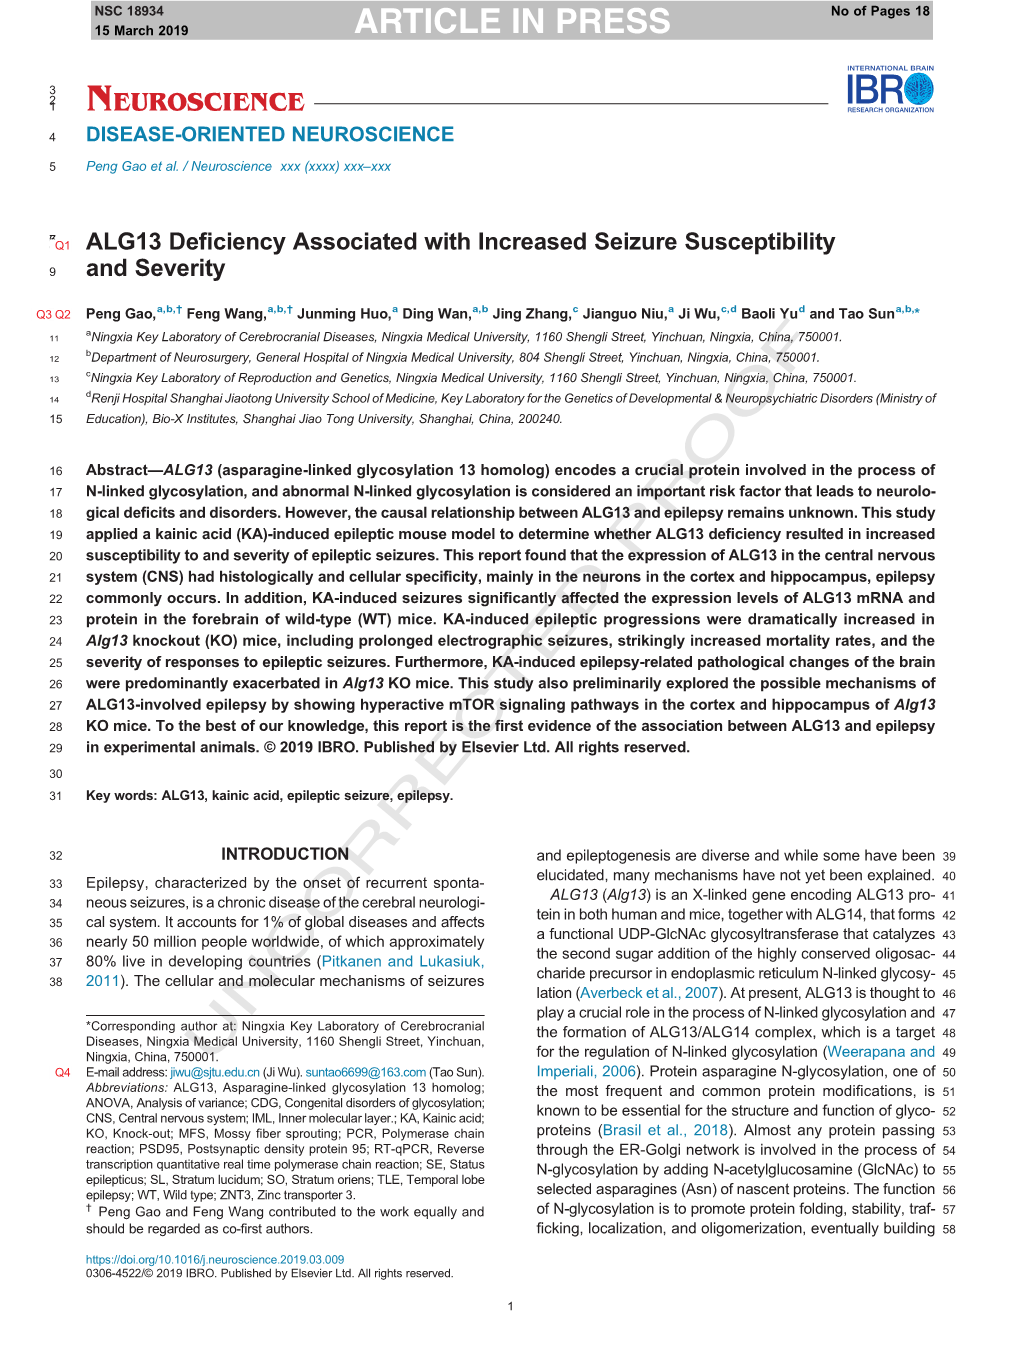 ALG13 Deficiency Associated with Increased Seizure Susceptibility